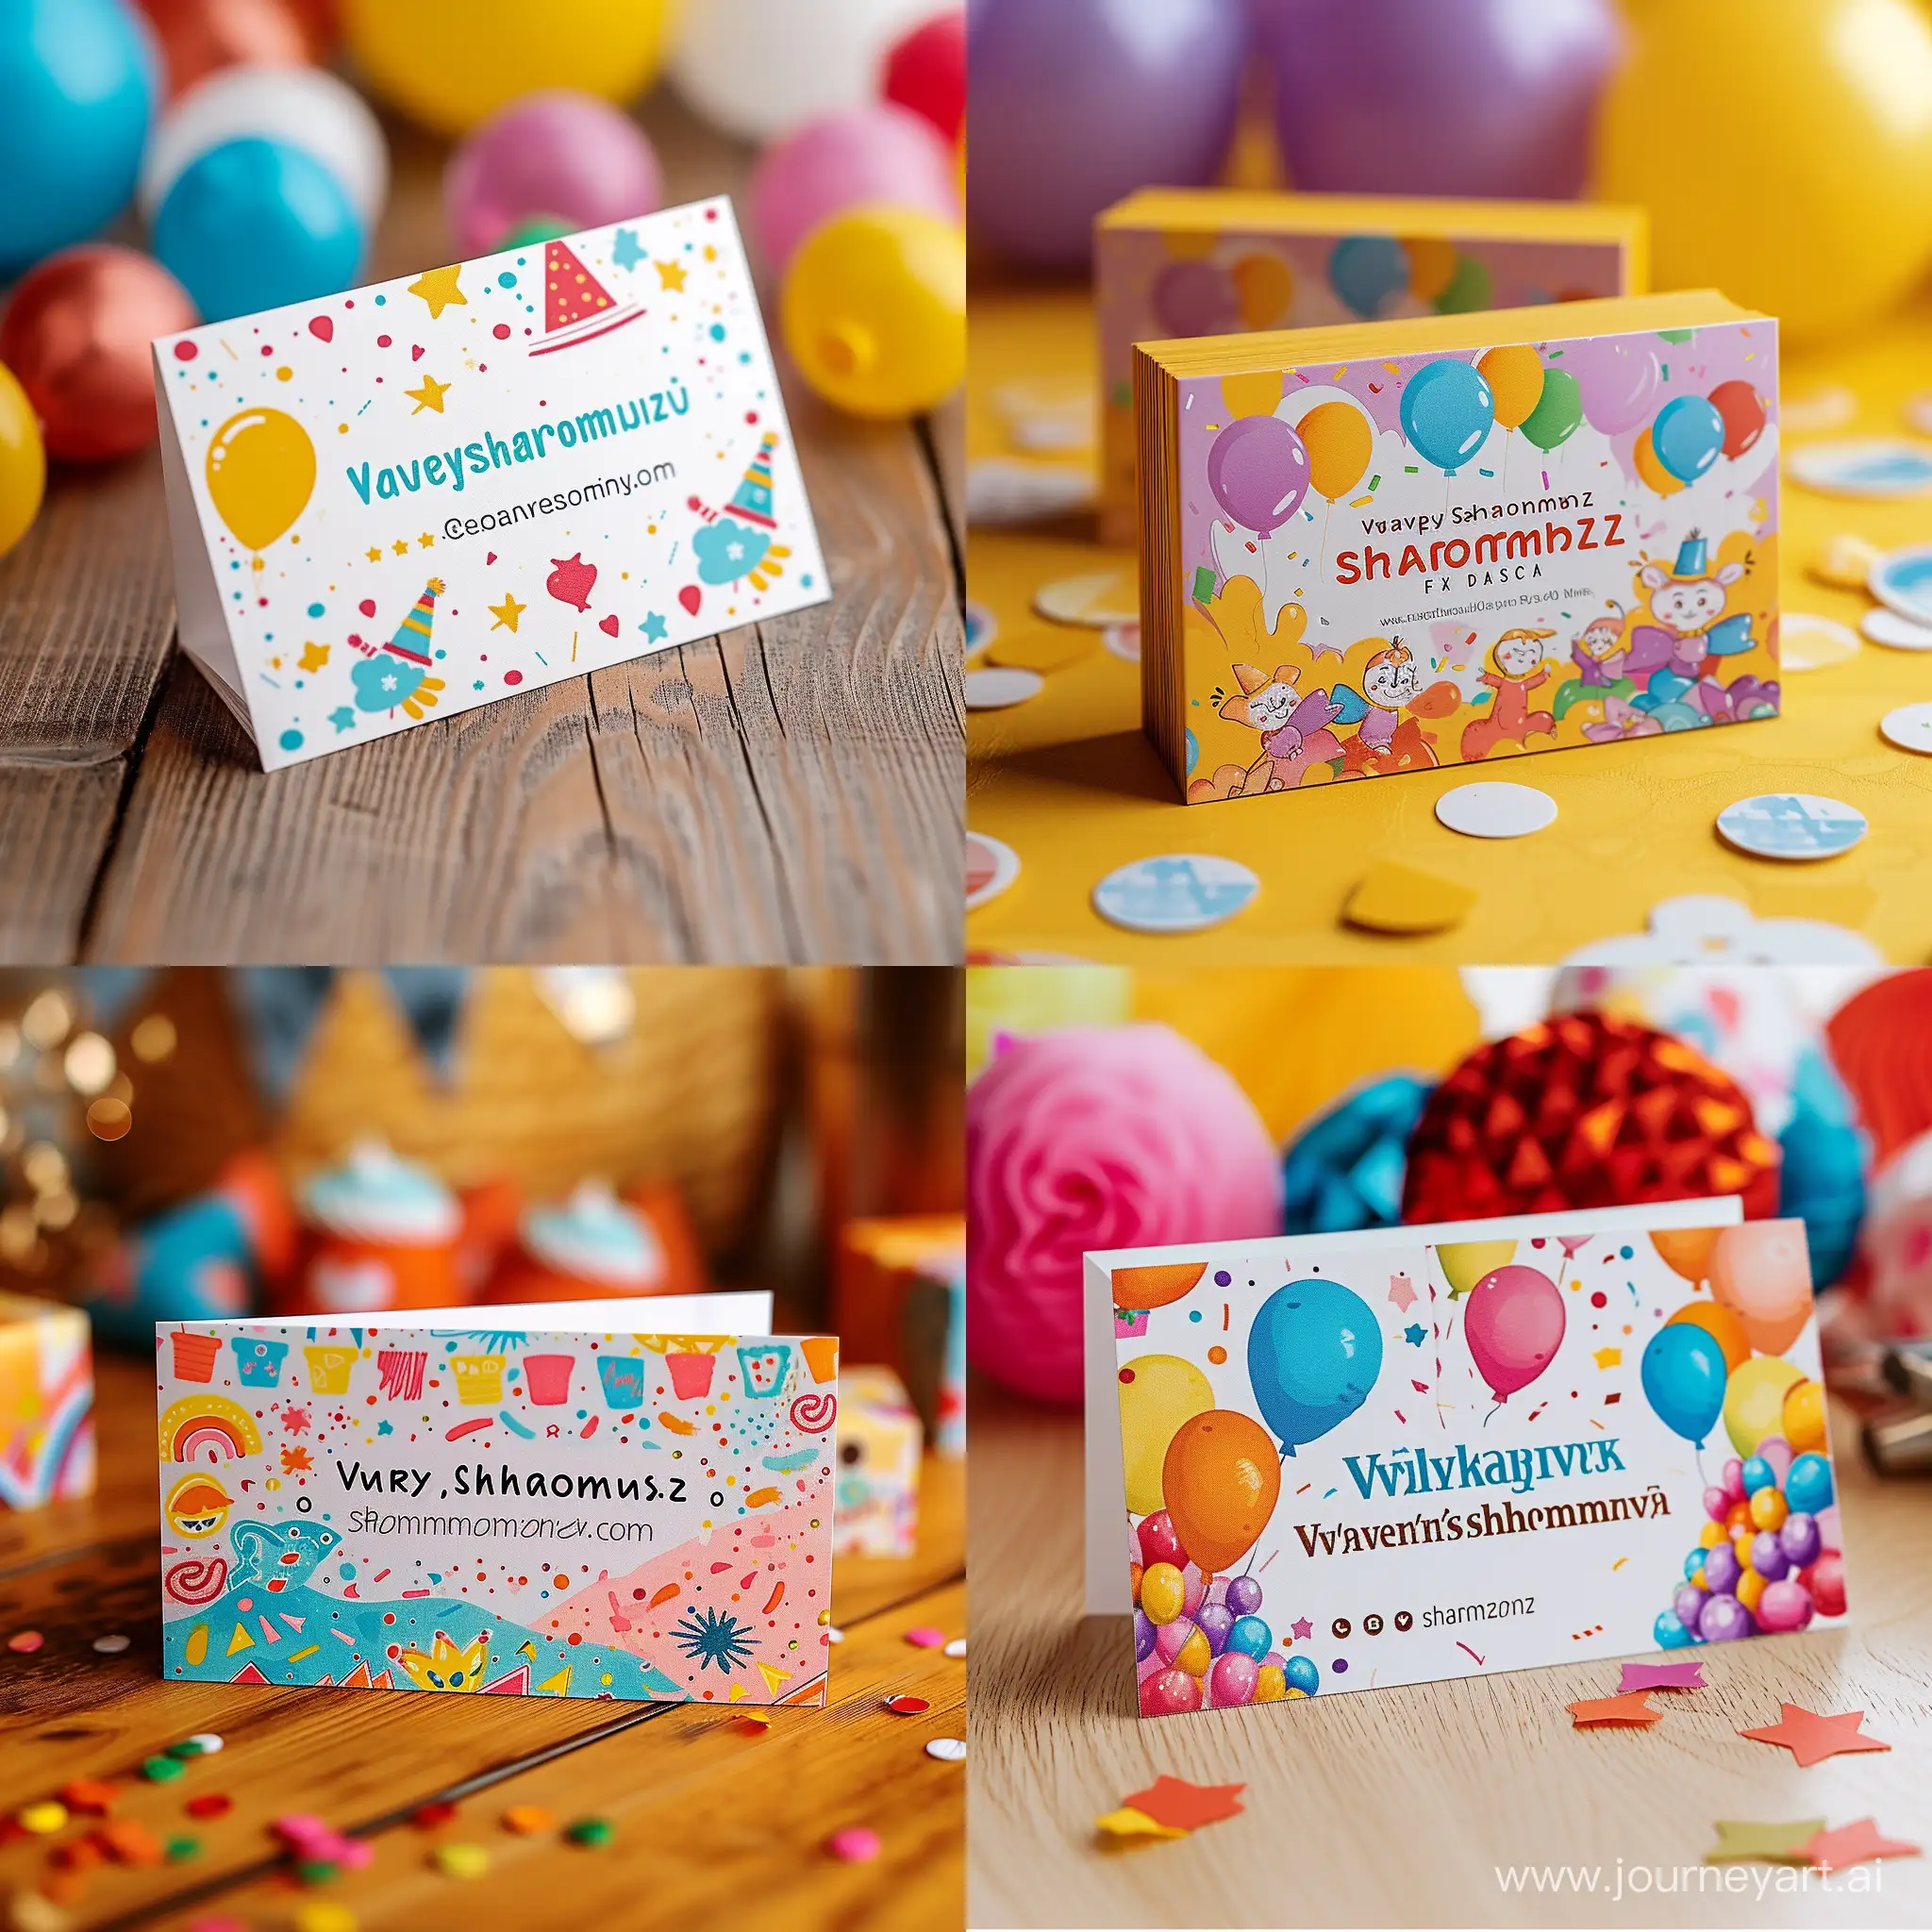 photographer business card design for children's parties. photographer's name is valery sharomova. business card in a bright, beautiful and pleasant design with festive fonts and images